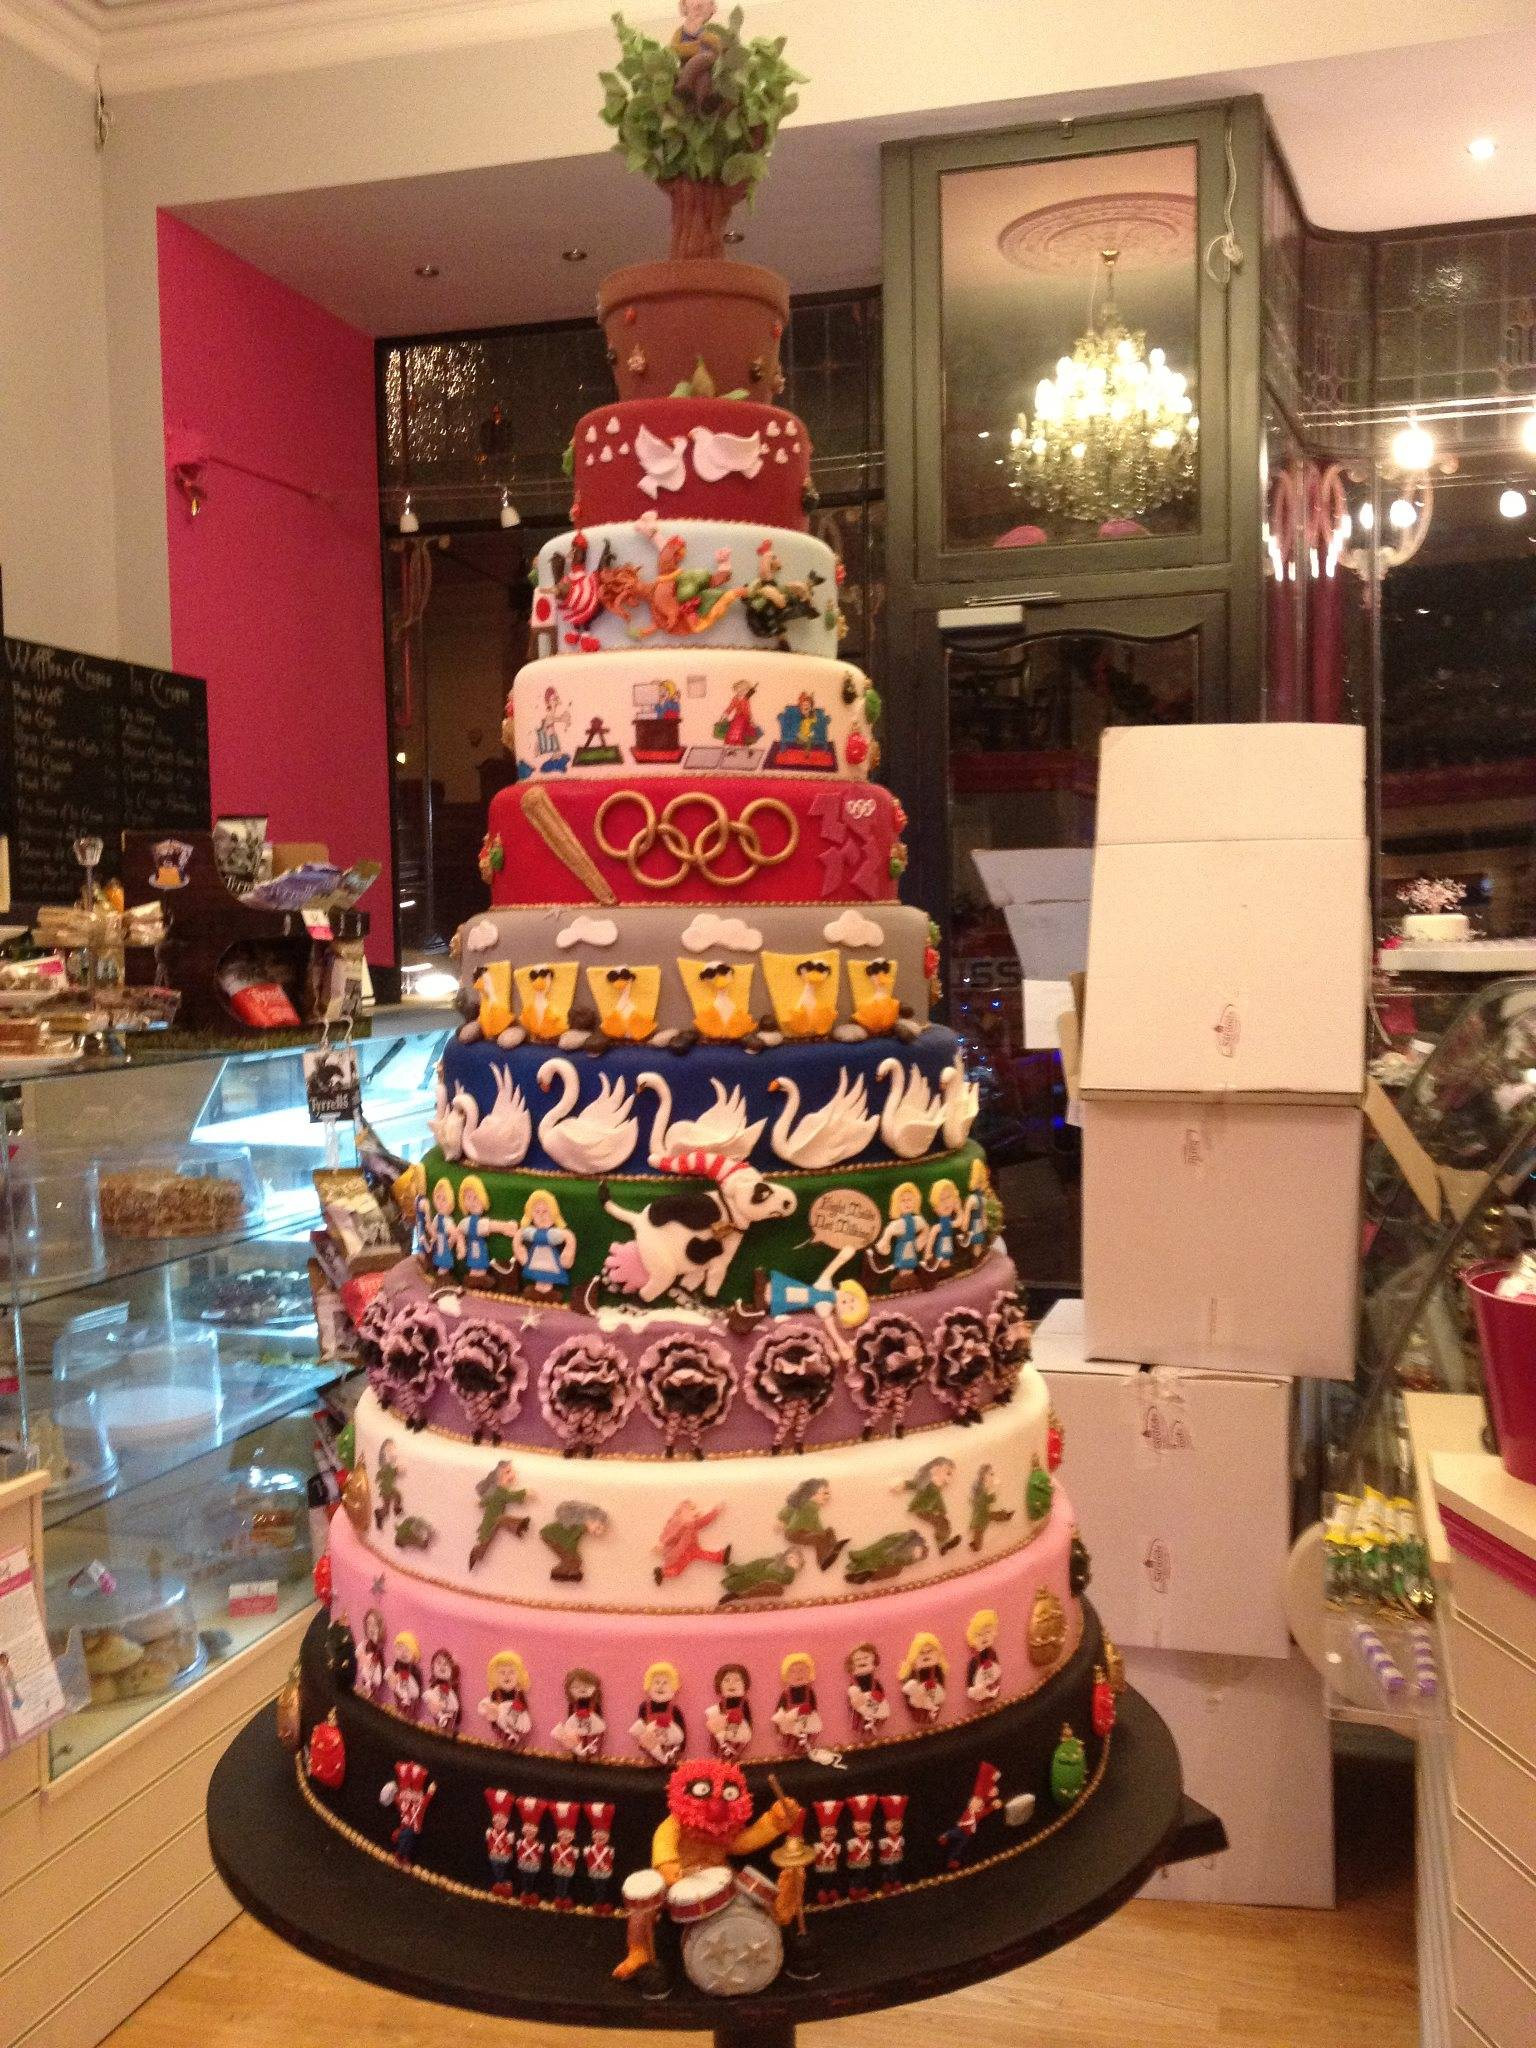 12 Days Of Christmas Cakes
 34 Christmas Cakes That Are More Works of Art Than They